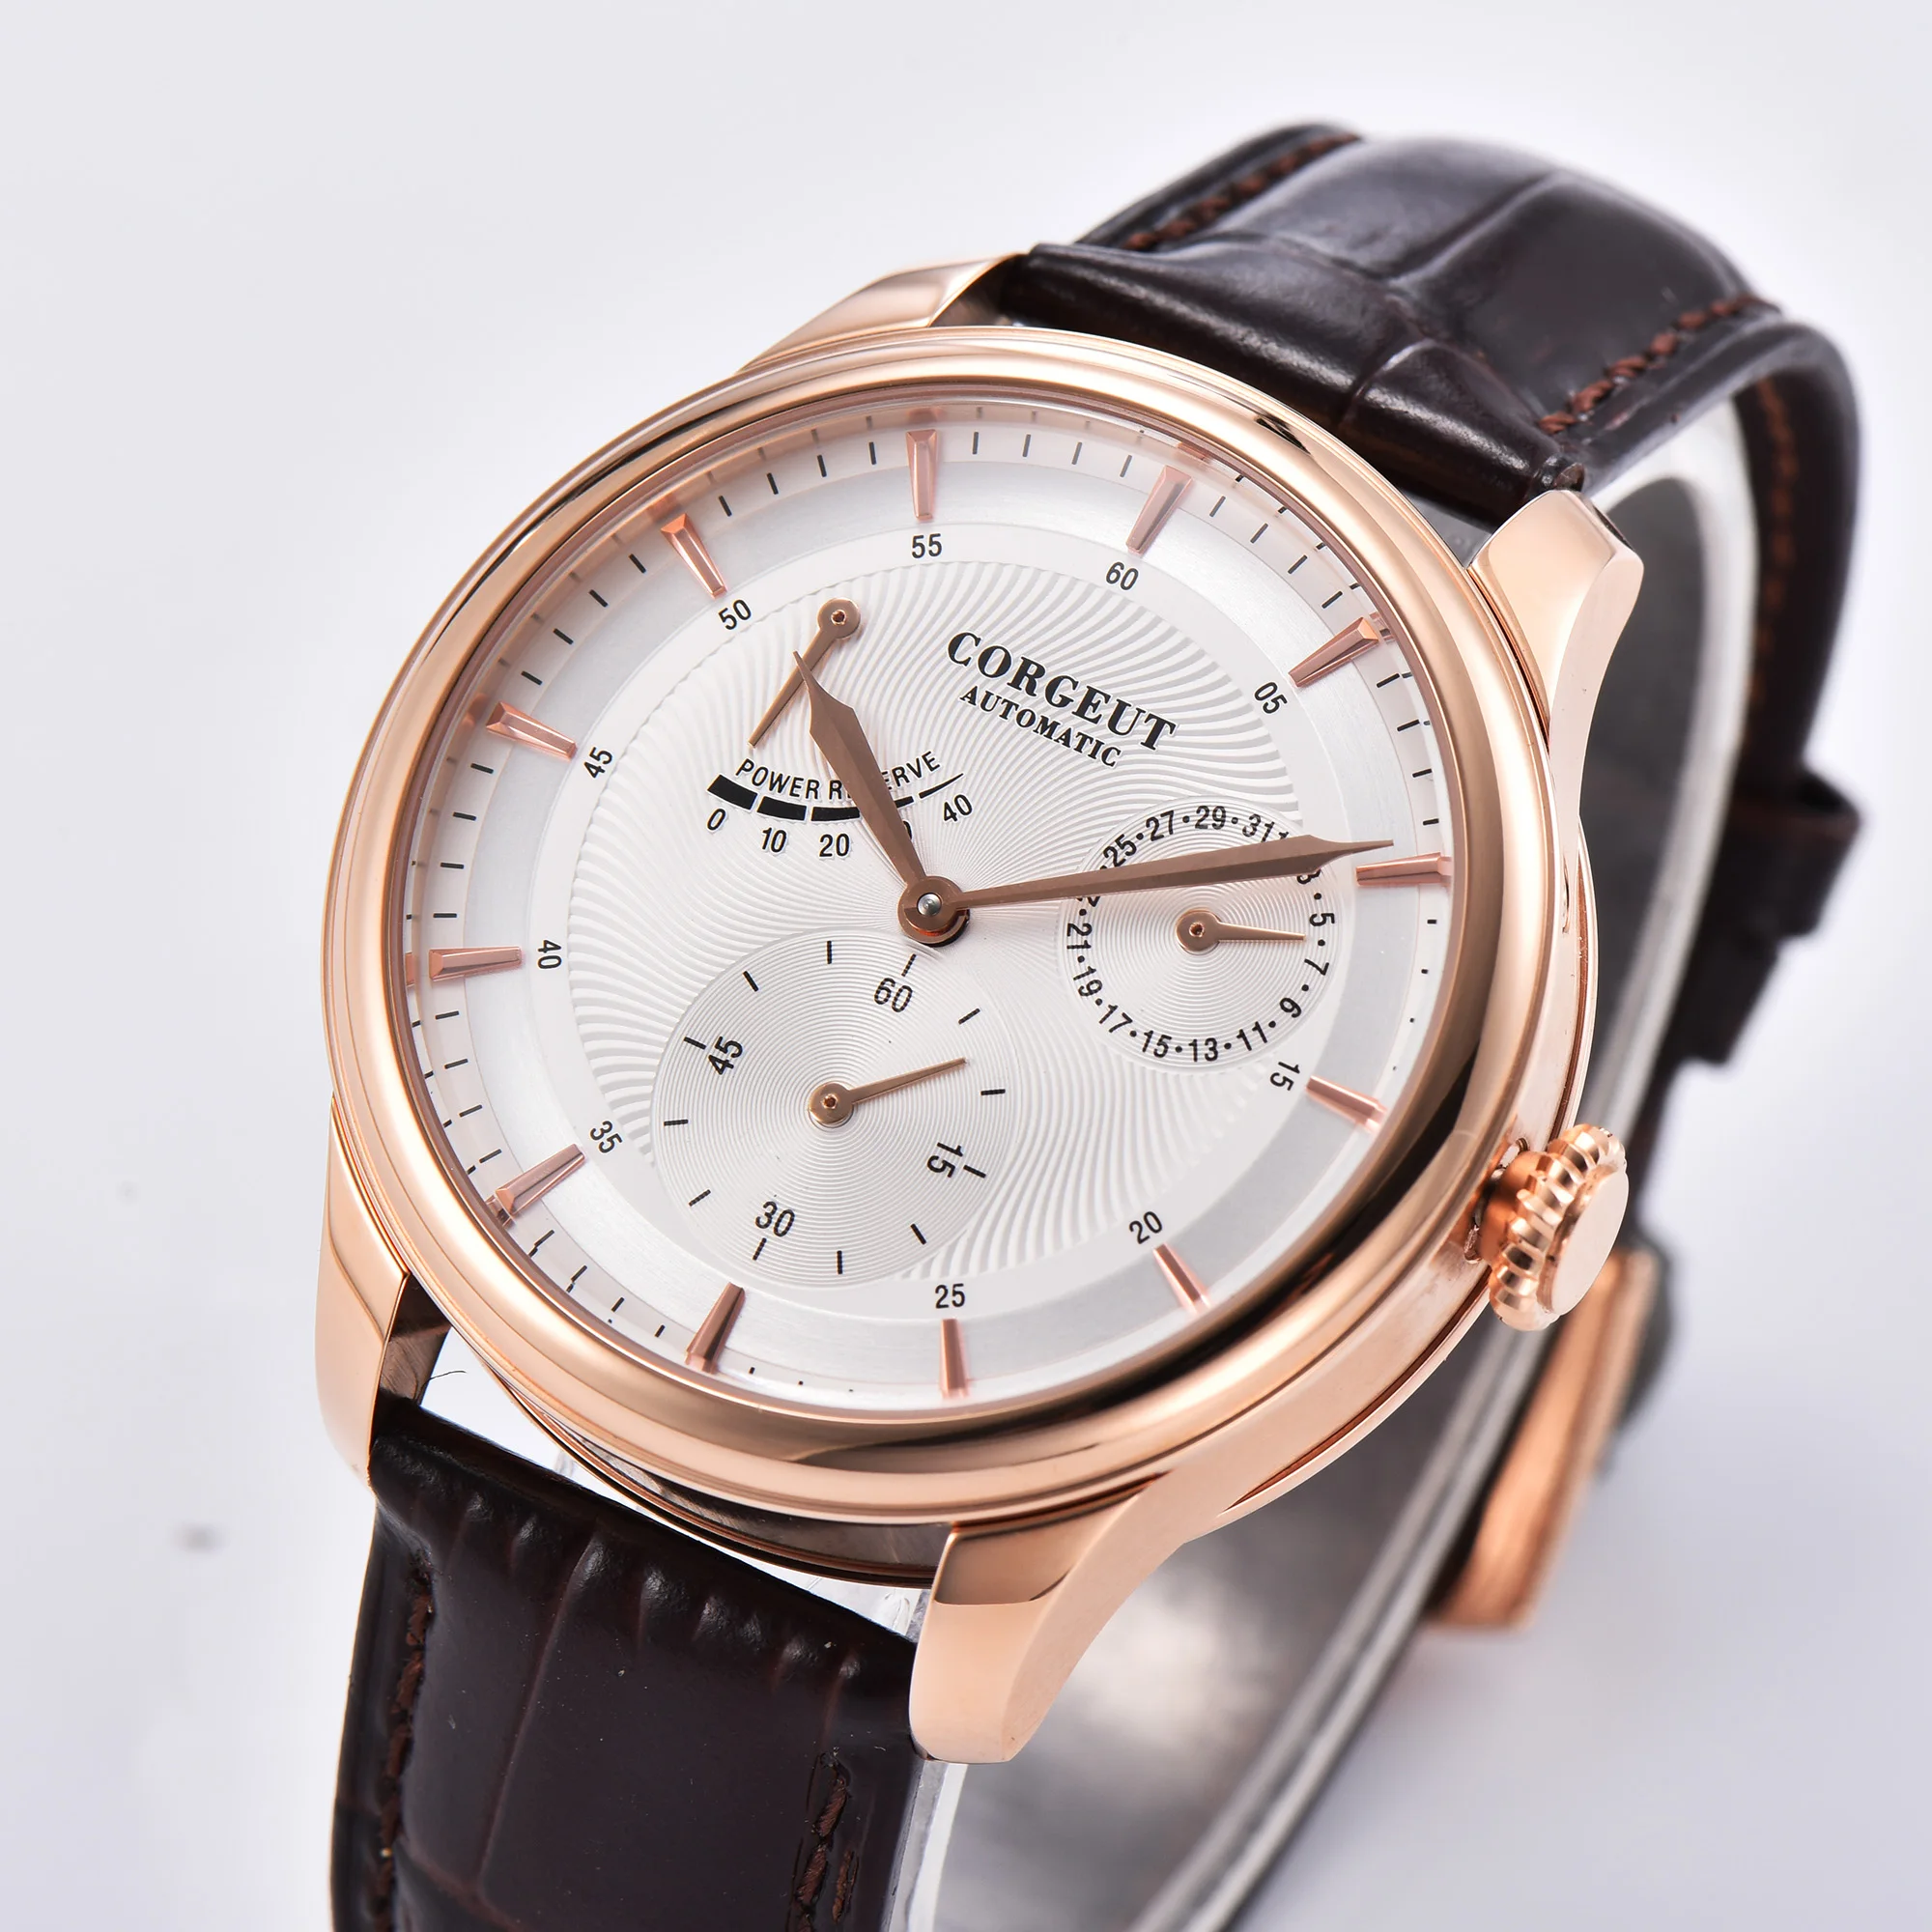 Corgeut Mens Watch Power Reserve Rosegolad Case White 40mm Luxury Top Brand Leather Seagull Automatic Clock Wristwatches Mens